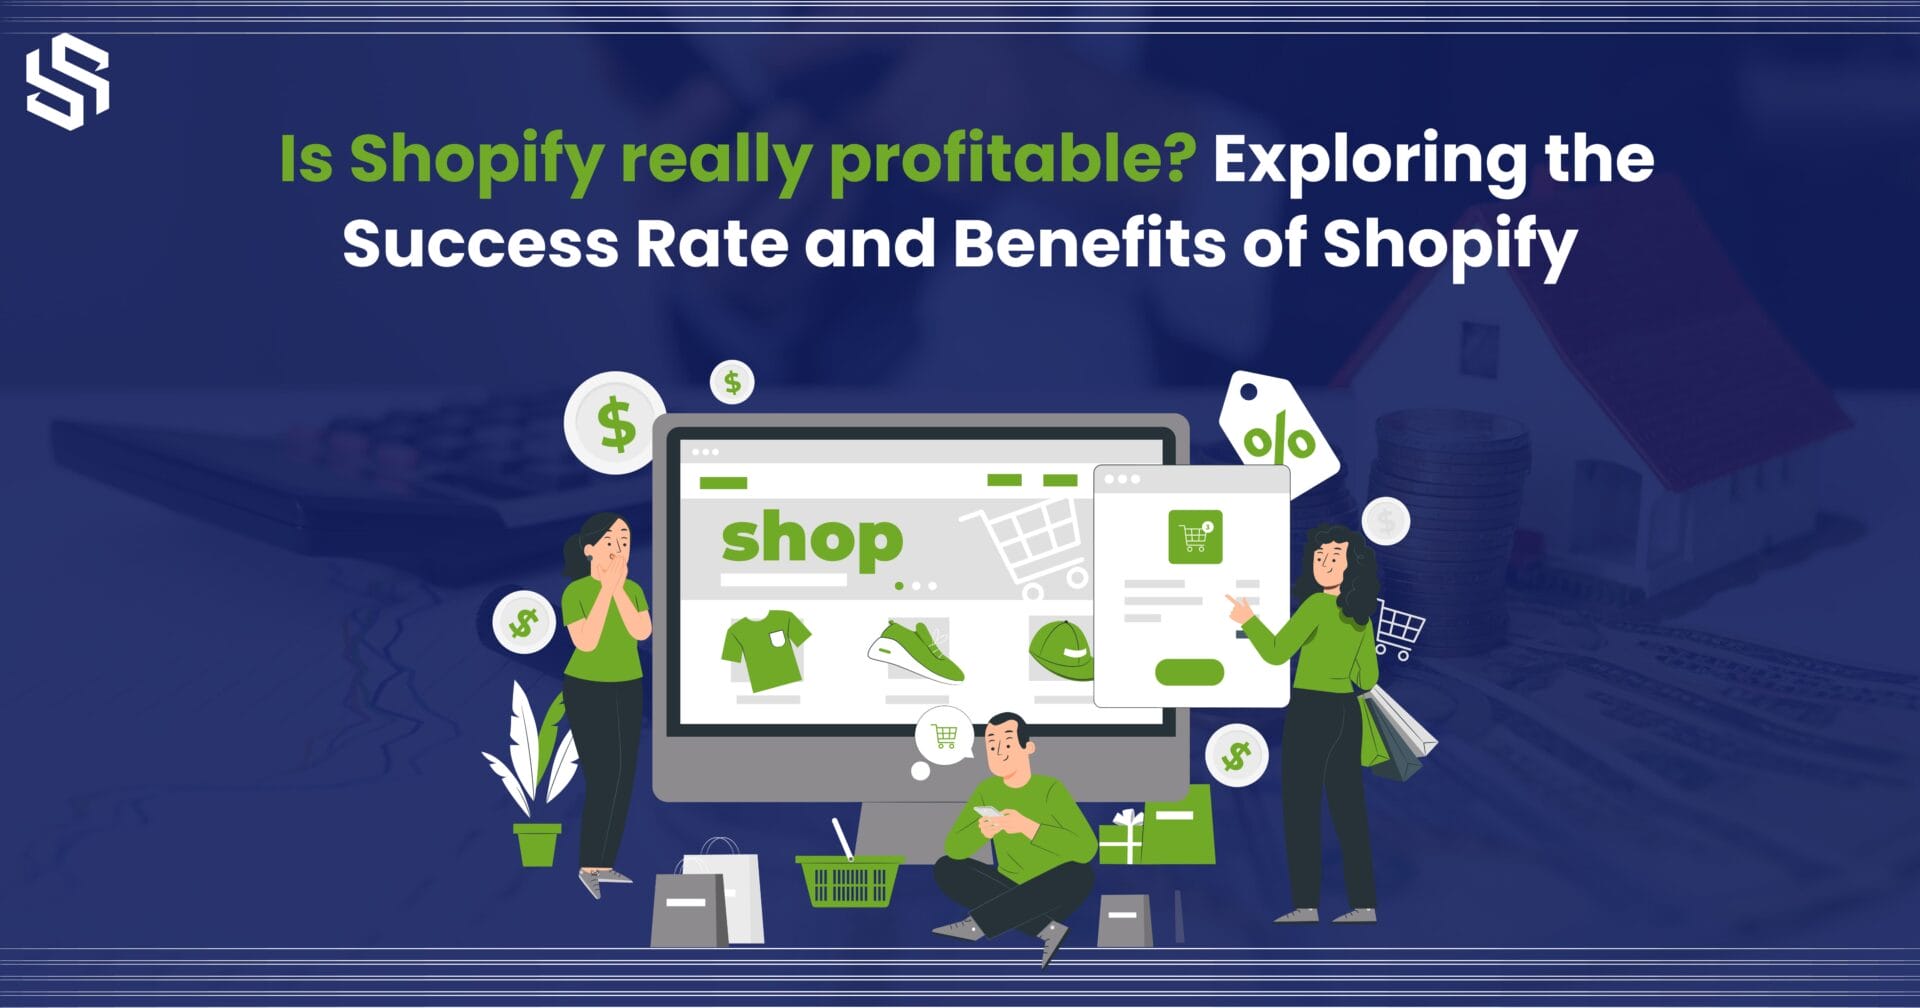 Is Shopify really profitable - Exploring the Success Rate and Benefits of Shopify